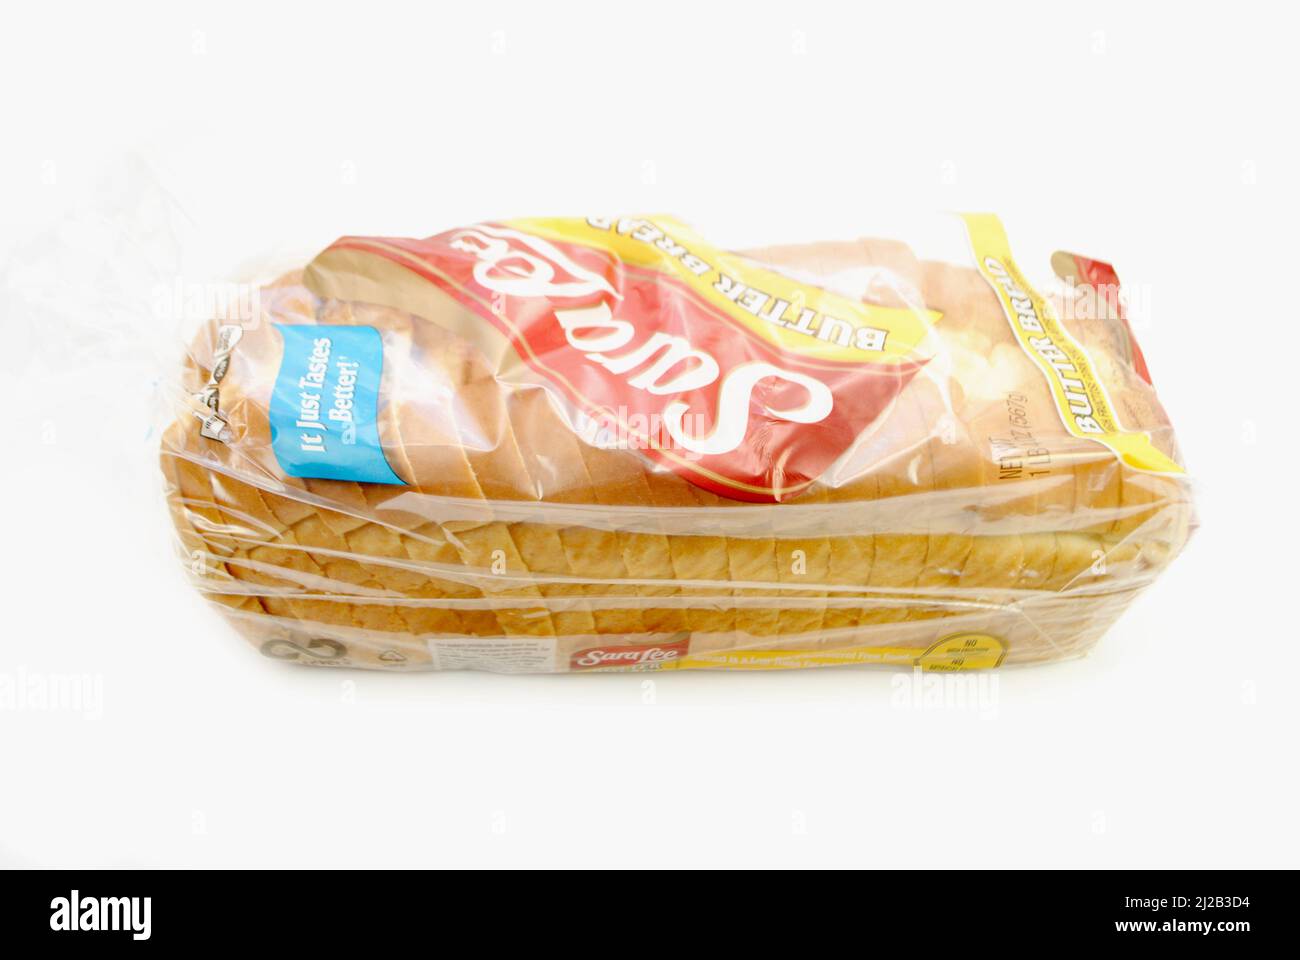 Sara Lee Brand Butter Bread Isolated Over a White Background Stock Photo